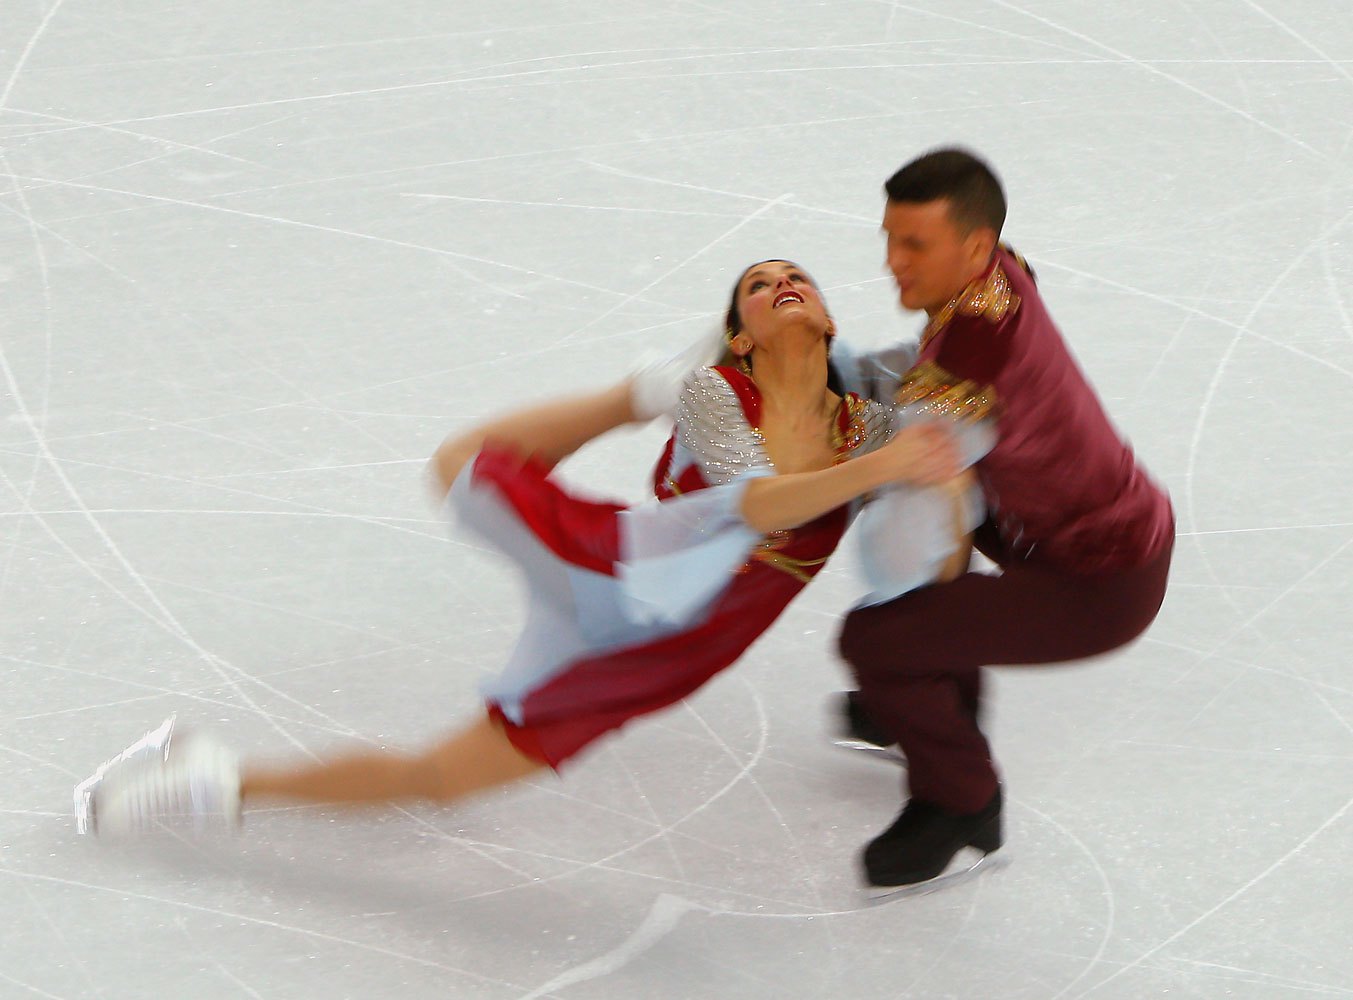 Charlene Guignard and Marco Fabbri of Italy during team ice dance free dance at the Sochi 2014 Winter Olympics